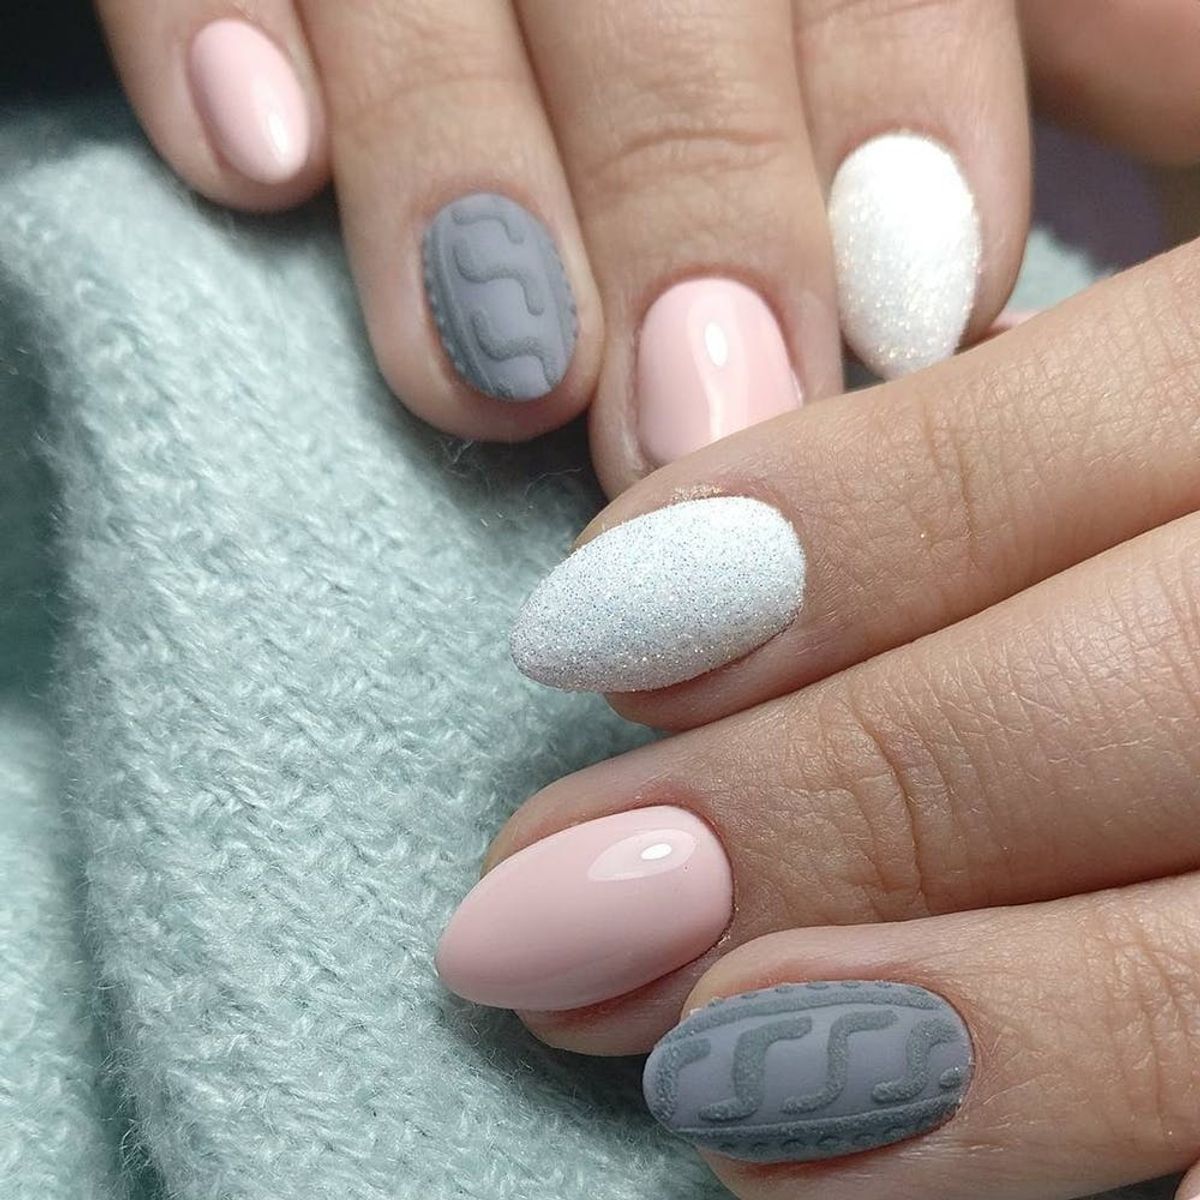 3 Alternatives to Acrylic Nails That You Need to Know About